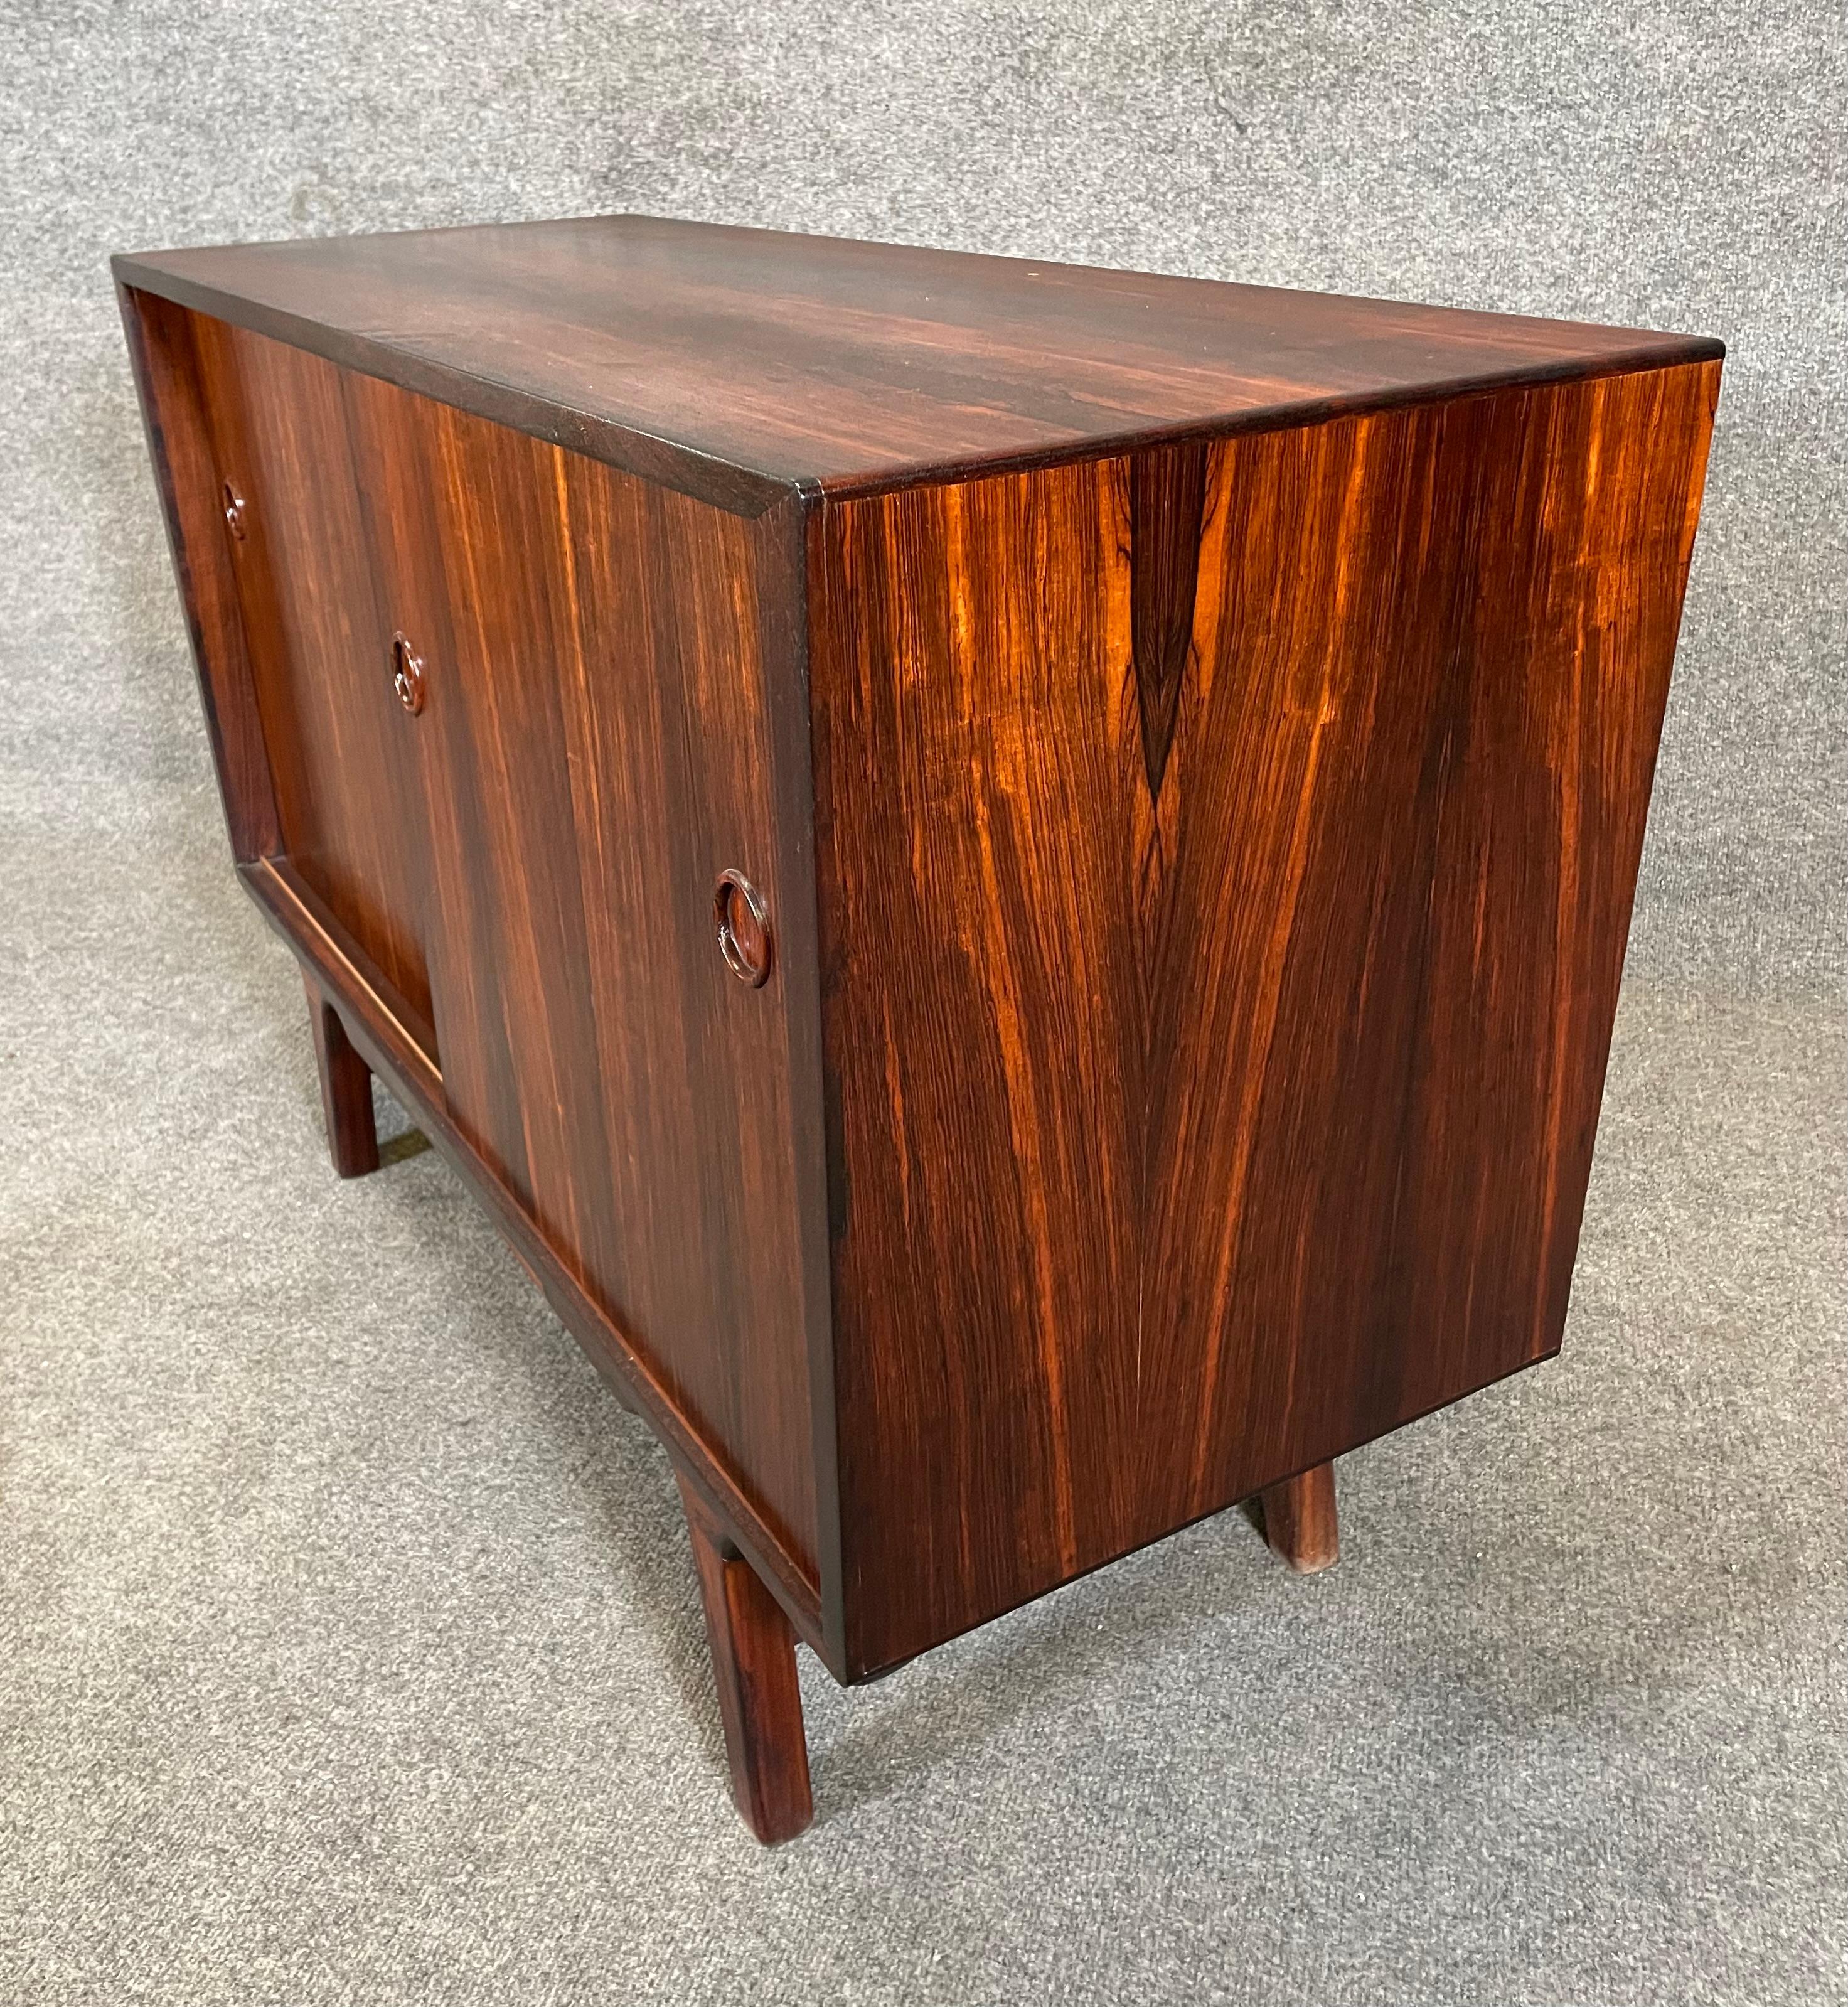 Here is a beautiful scandinavian modern cabinet in rosewood manufactured in Denmark in the 1960's.
This lovely case piece, recently imported from Europe to California before its refinishing, features a vibrant wood grain, two sliding doors revealing